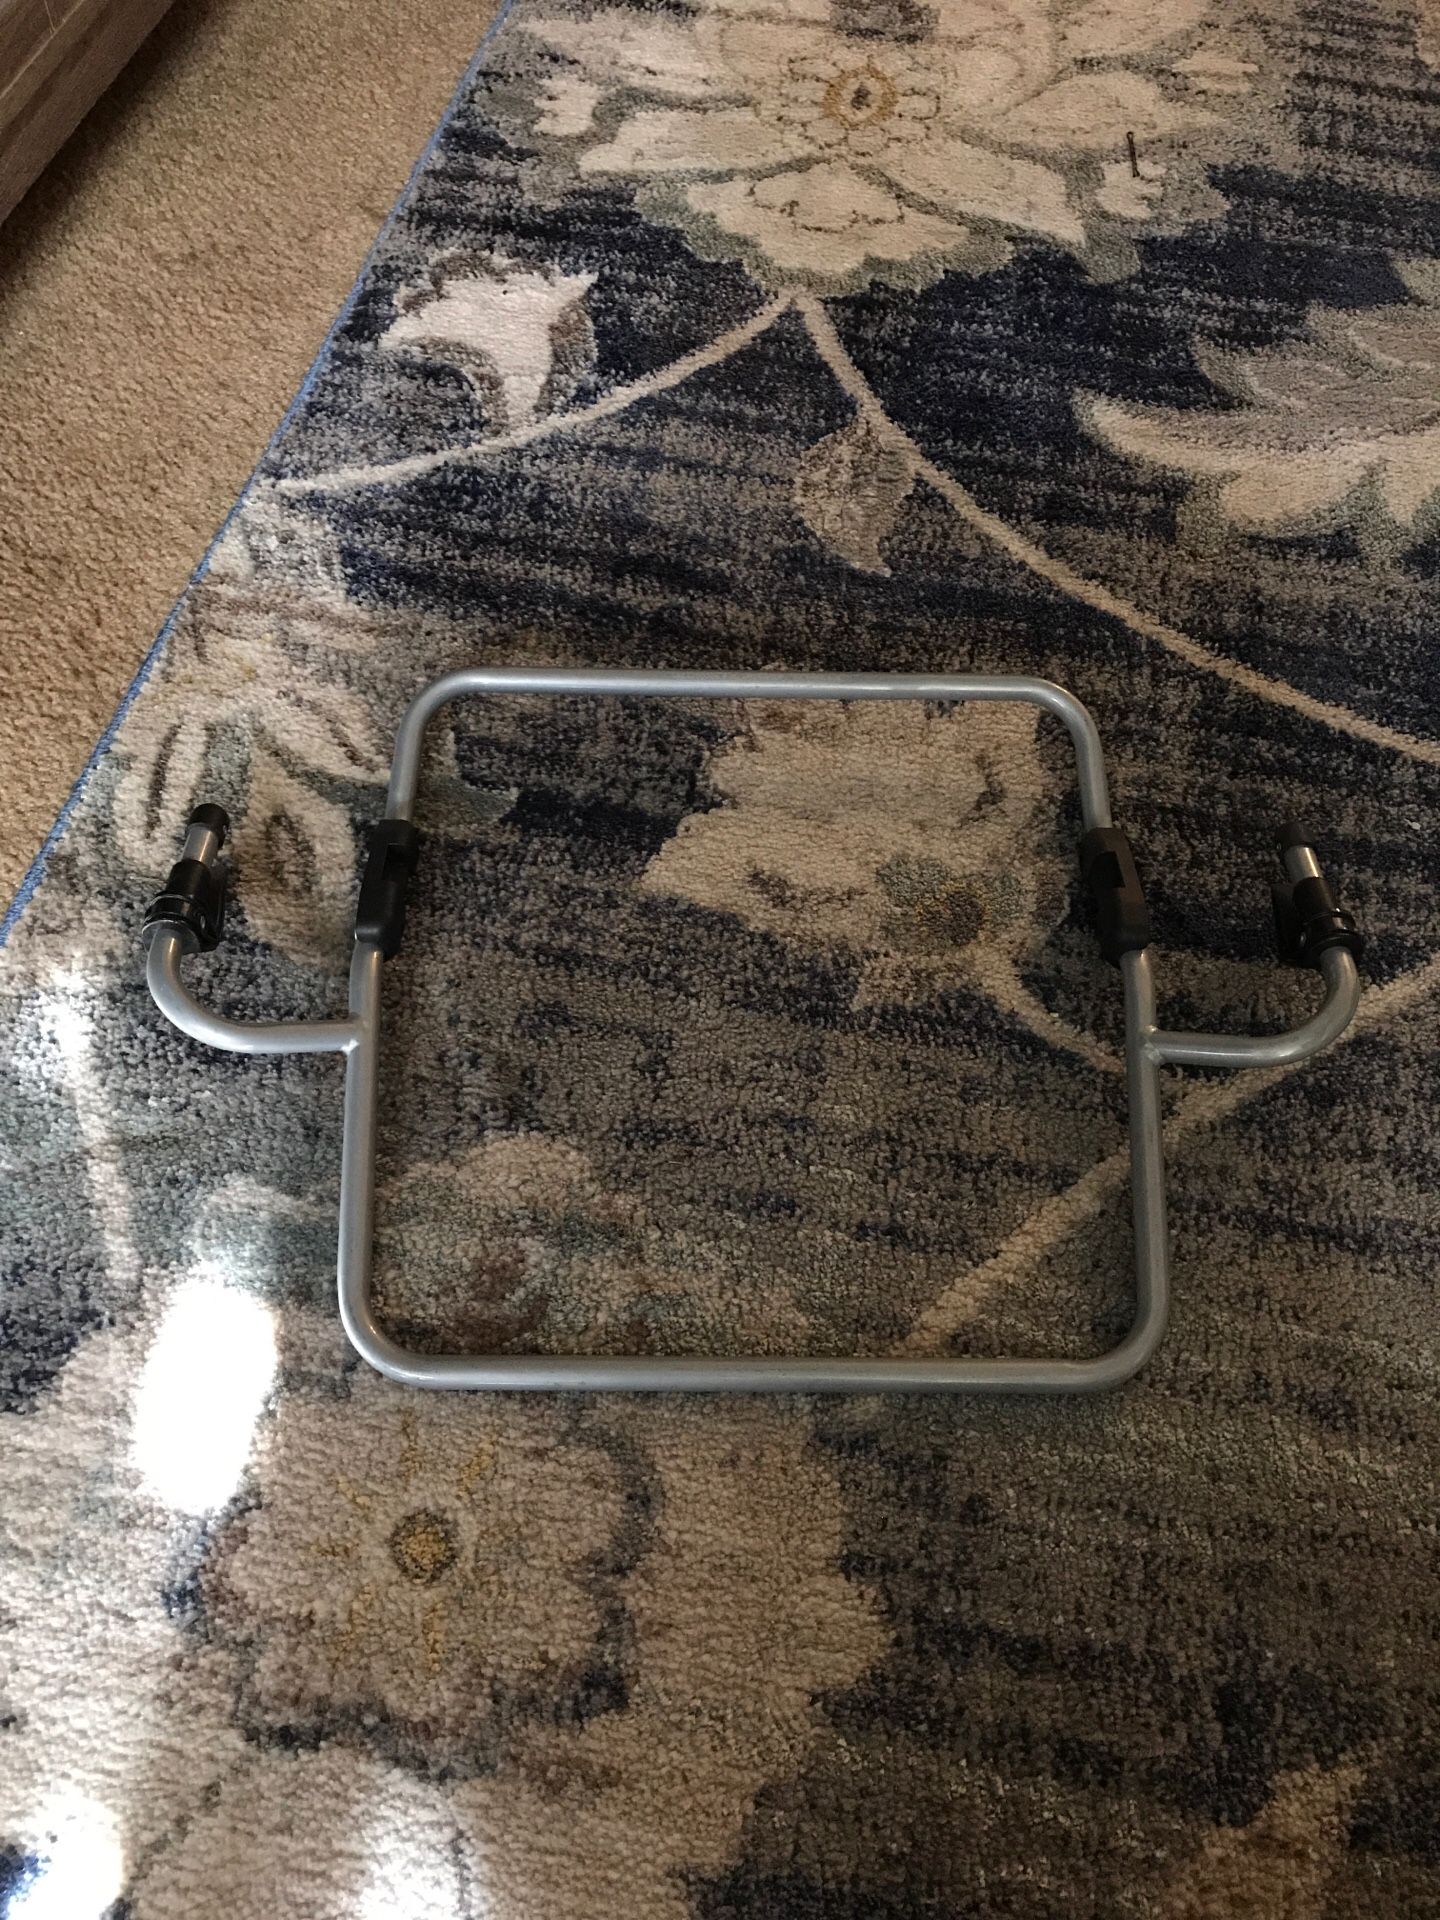 Bob stroller adapter for Graco Click connect